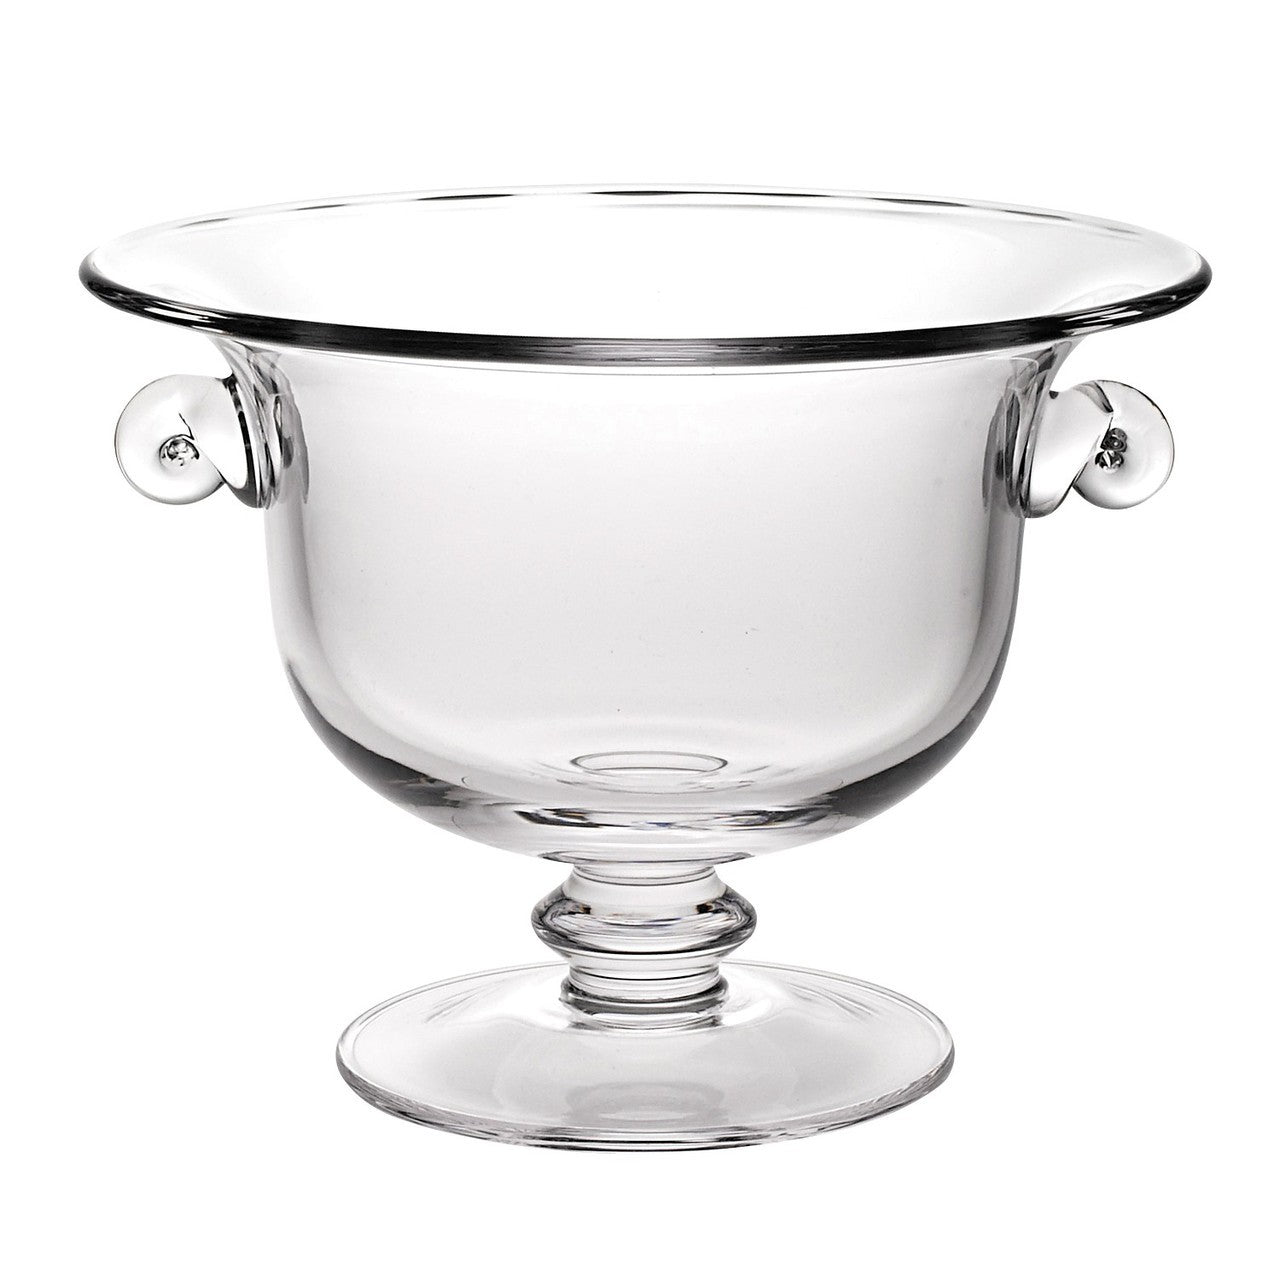 Champion 11 inch Trophy or Fruit Bowl